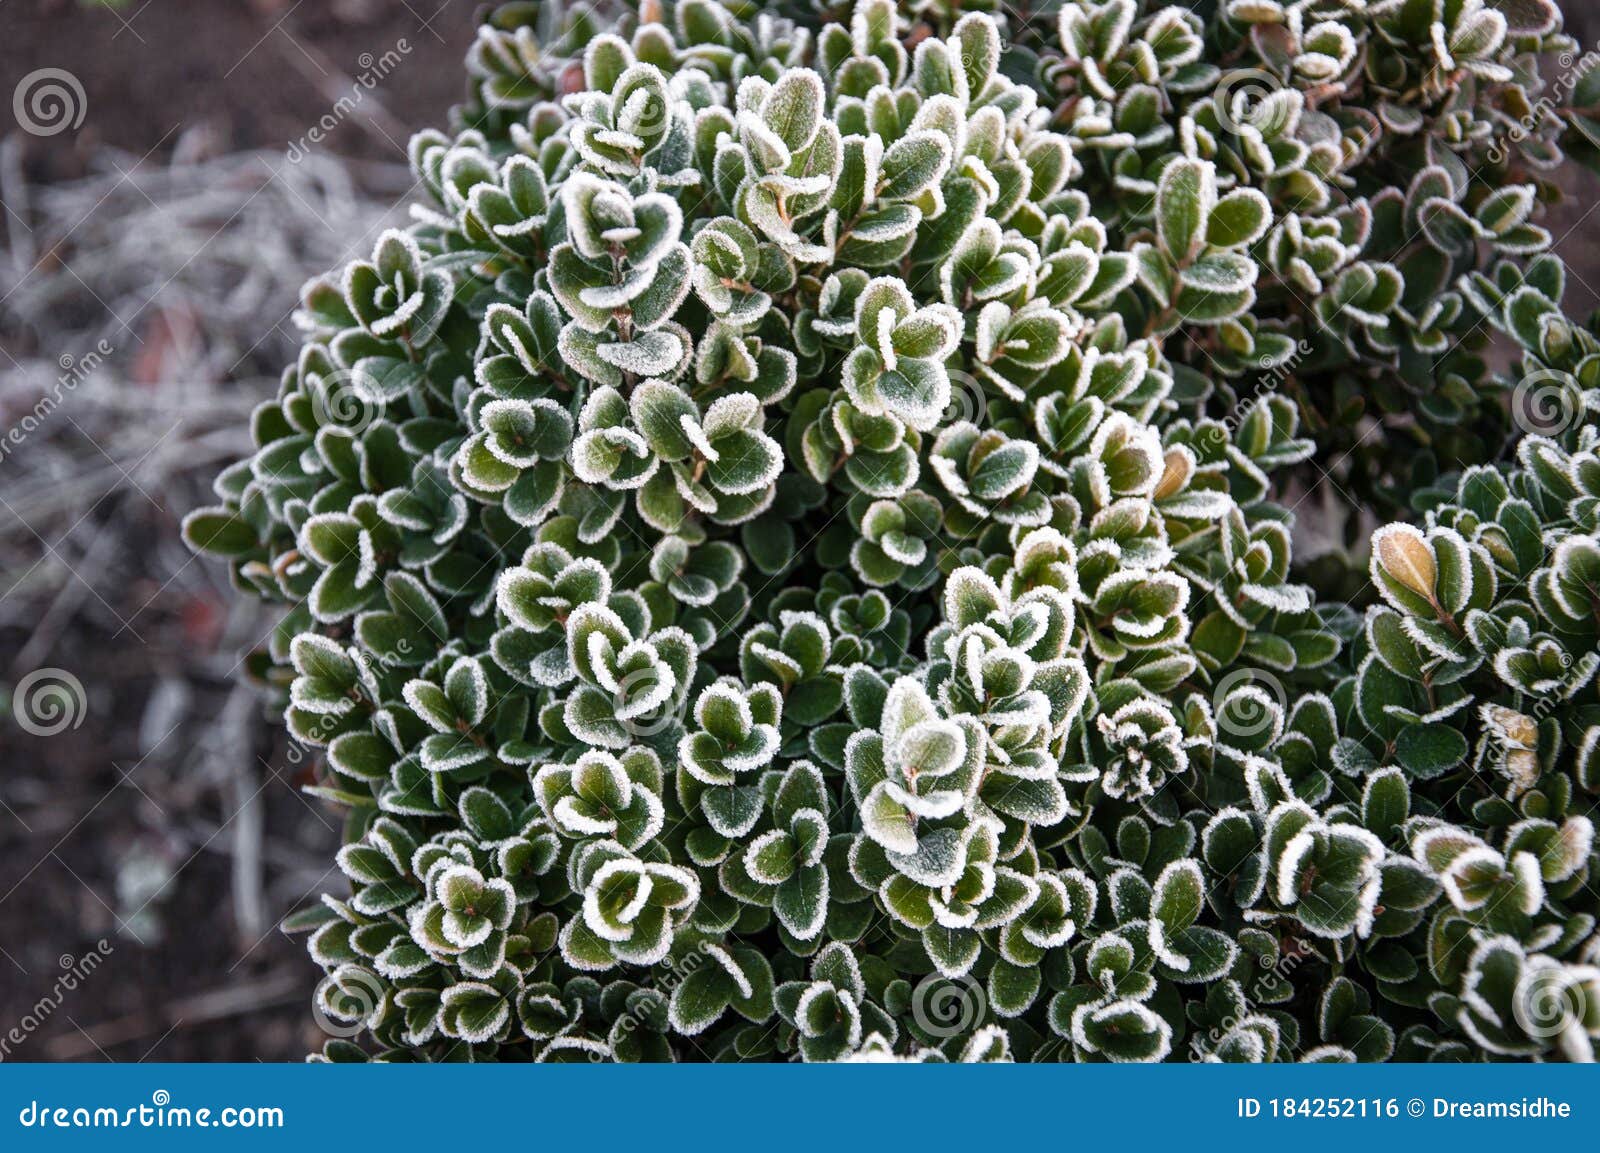 Bush Of Stonecrop Family Covered With Frost Stock Photo Image Of Horticulture Botanical 184252116